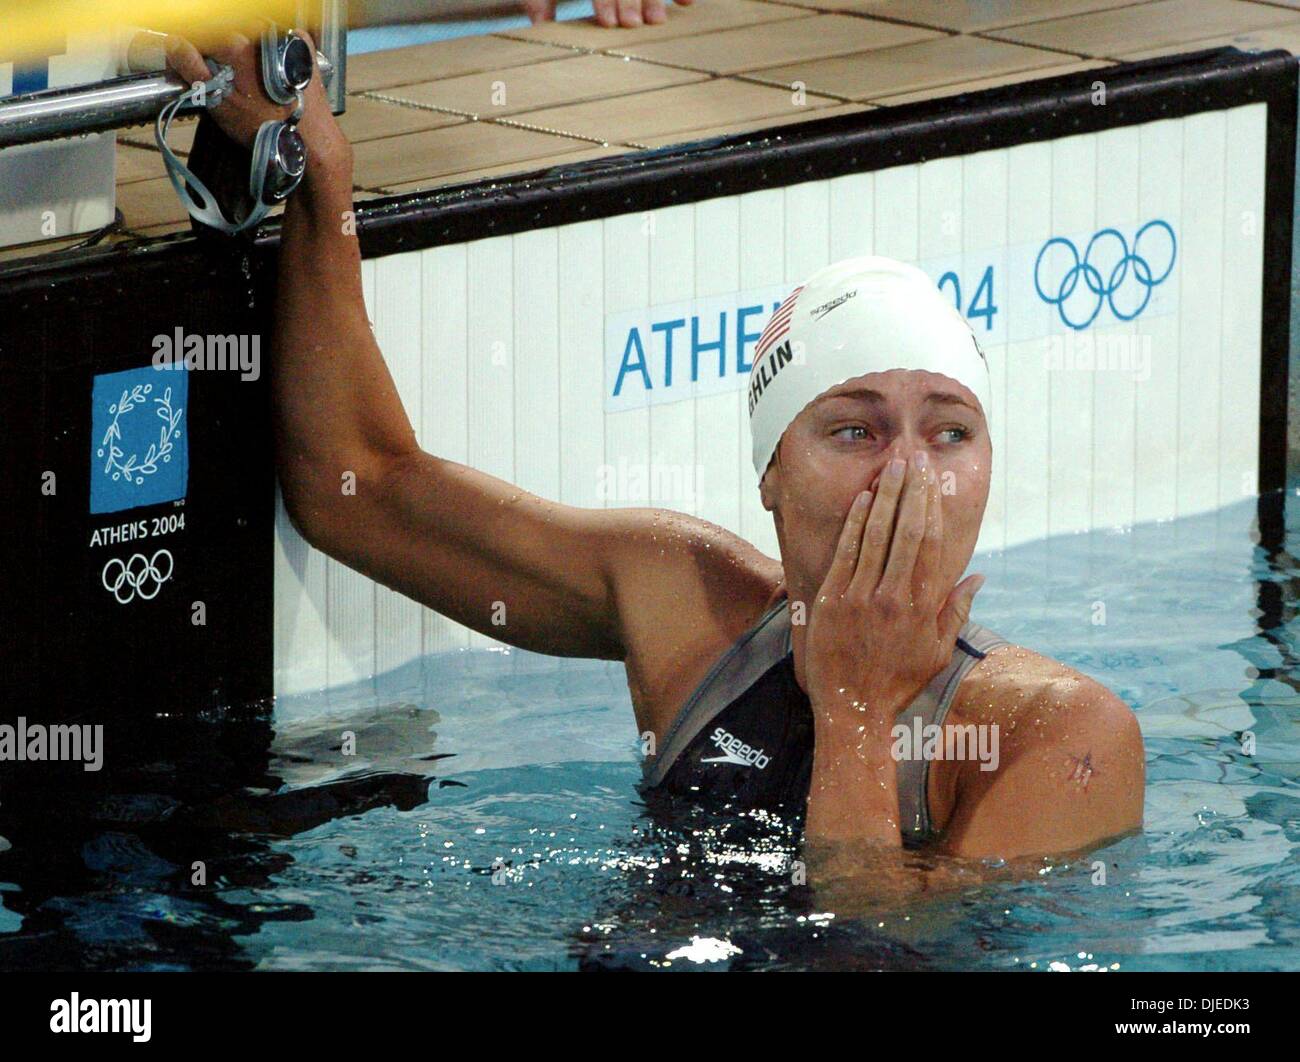 KRT SPORTS STORY SLUGGED: OLY-SWIMMING KRT PHOTO BY KARL MONDON/CONTRA COSTA TIMES (August 16) ATHENS, GREECE  -- Natalie Coughlin of the United States celebrates winning gold in the 100-meter backstroke on Monday, August 16, 2004, during the Olympic Games in Athens, Greece. (gsb) 2004 (Credit Image: Karl Mondon/Contra Costa Time/ZUMA Press) Stock Photo